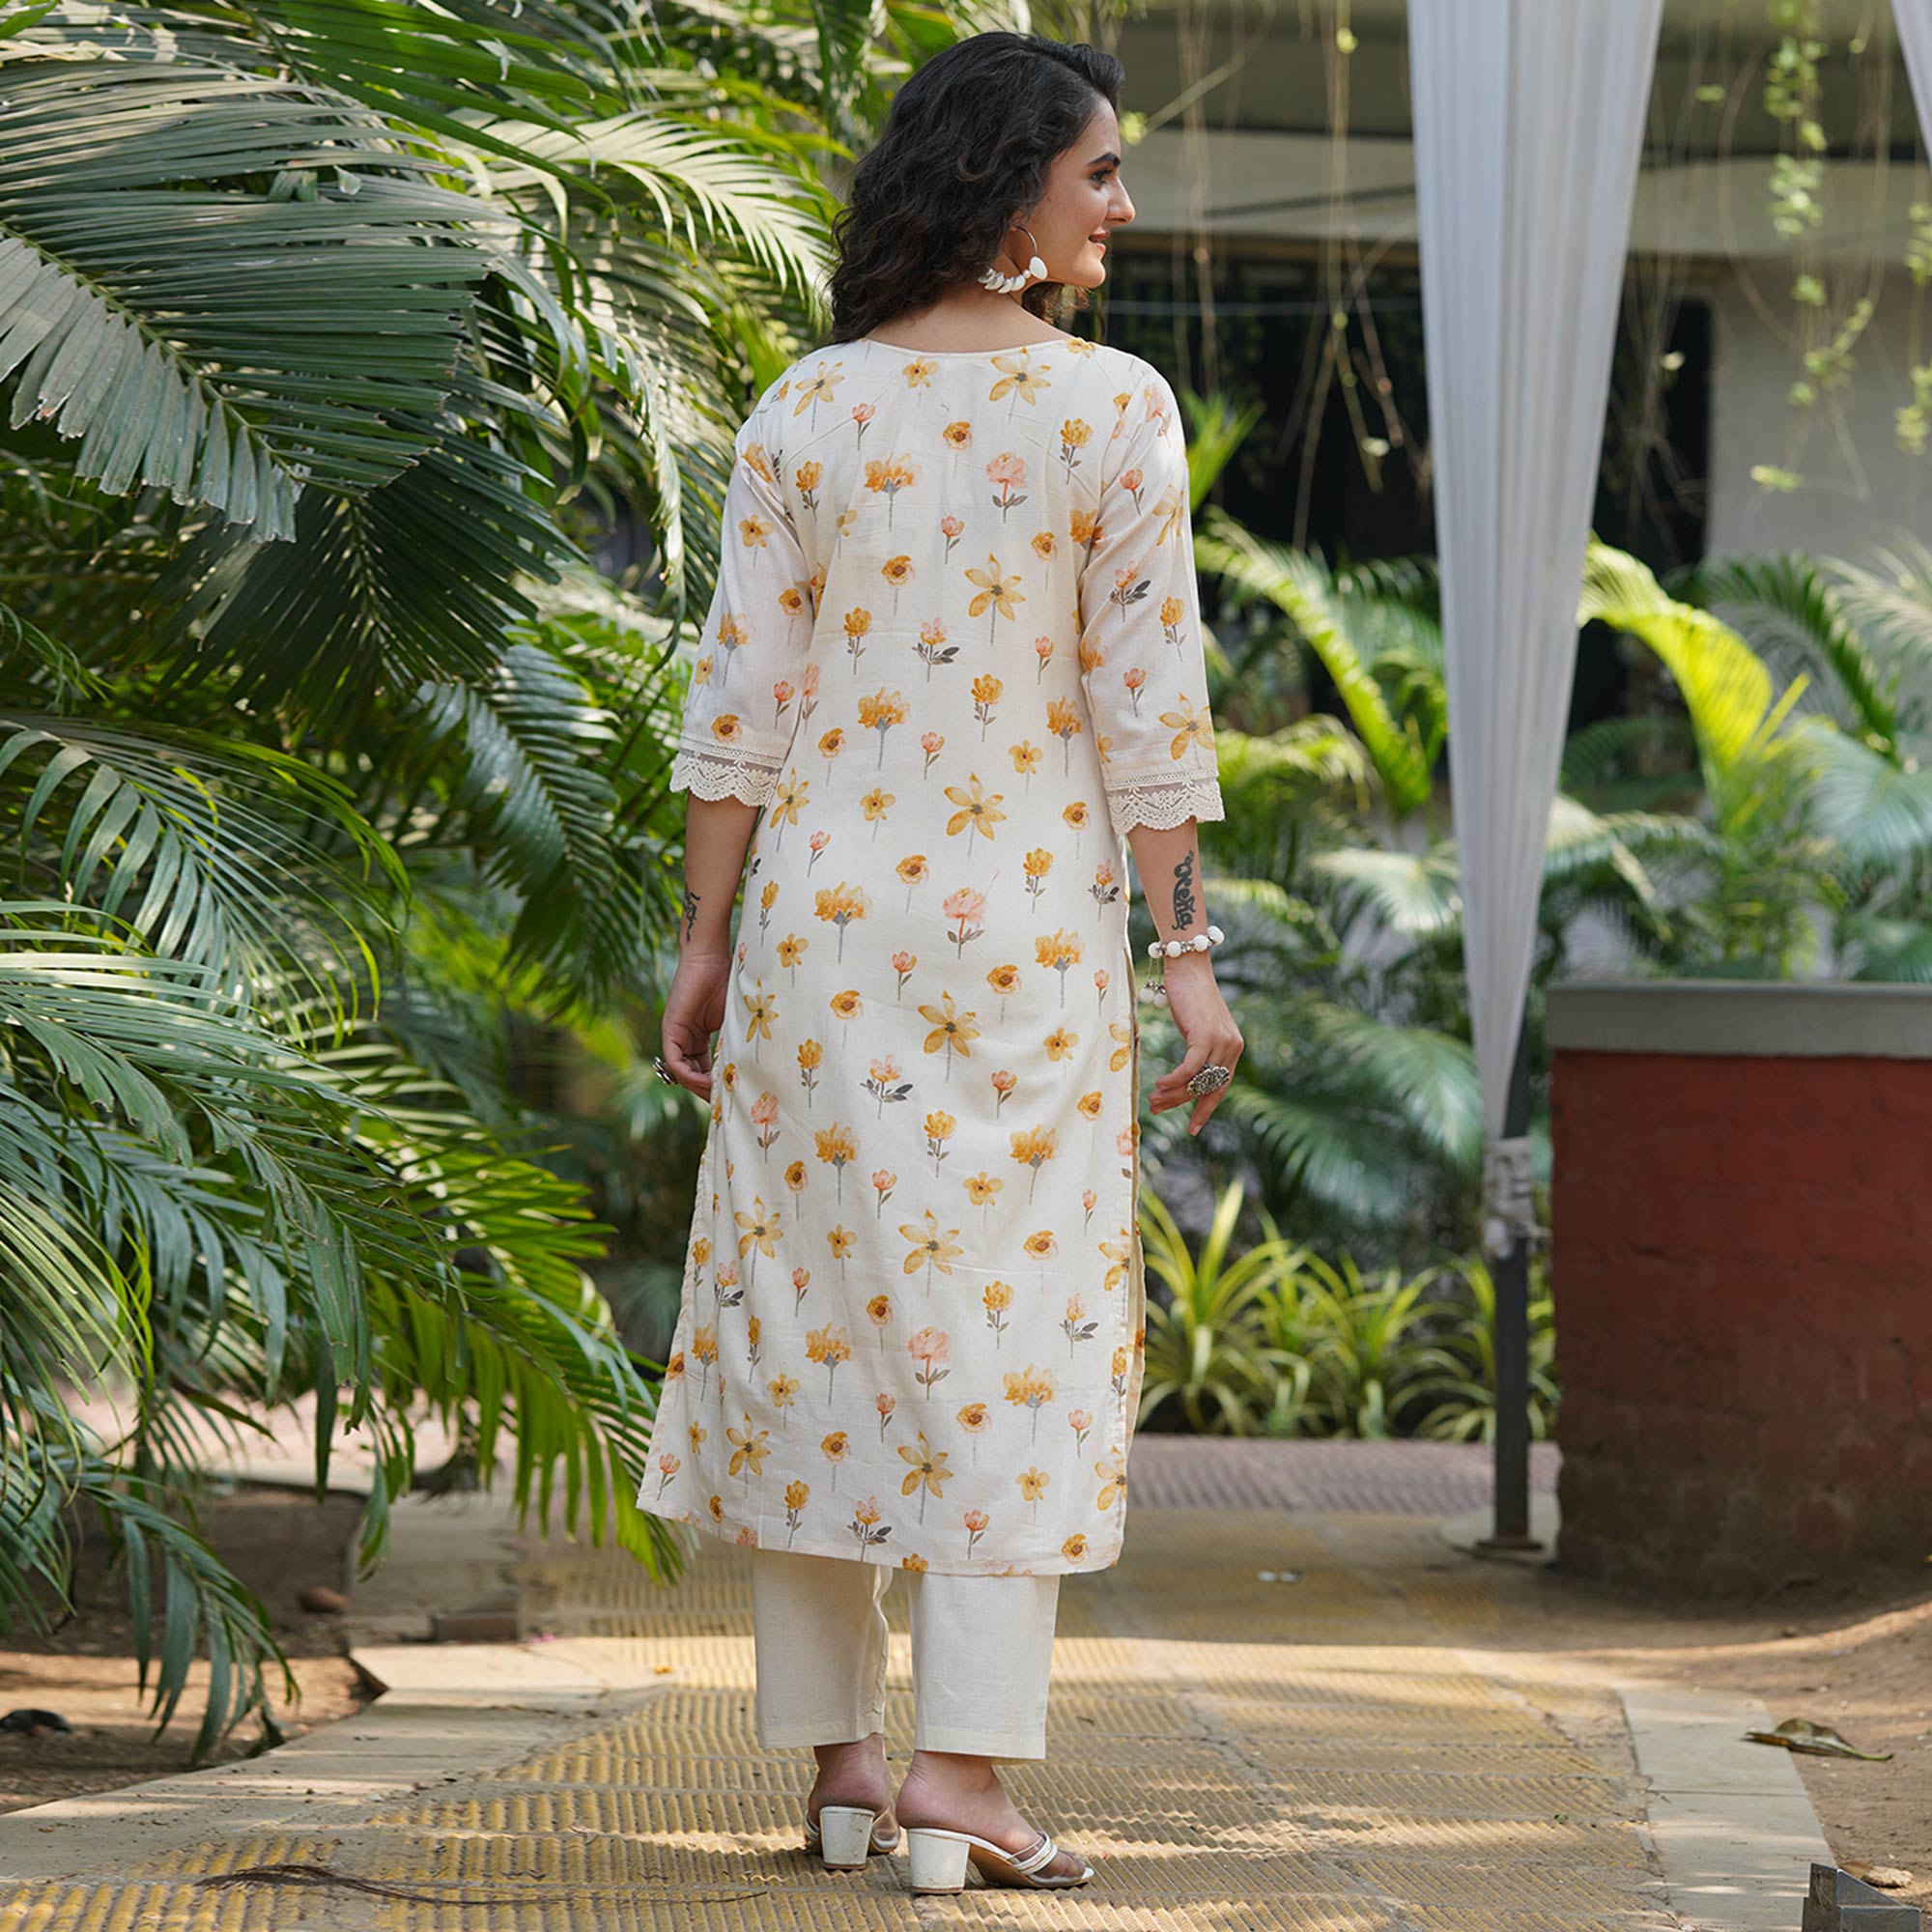 Off White & Yellow Floral Printed Pure Cotton Salwar Suit